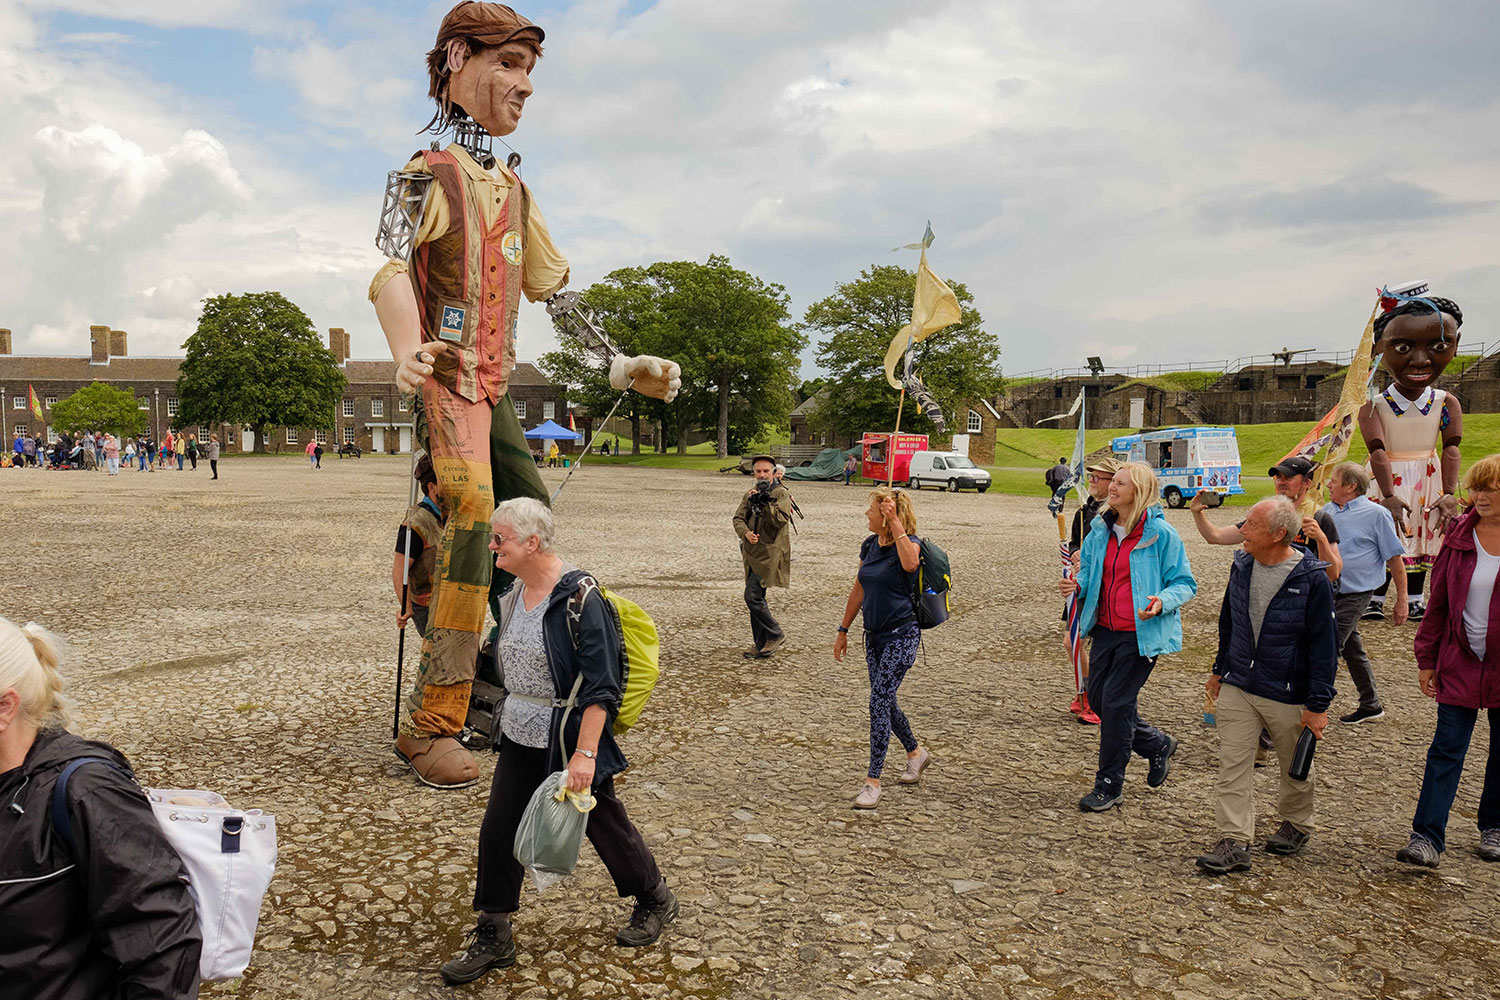 A large puppet representing a Tilbury dock worker greets walkers arriving at Tilbury Fort